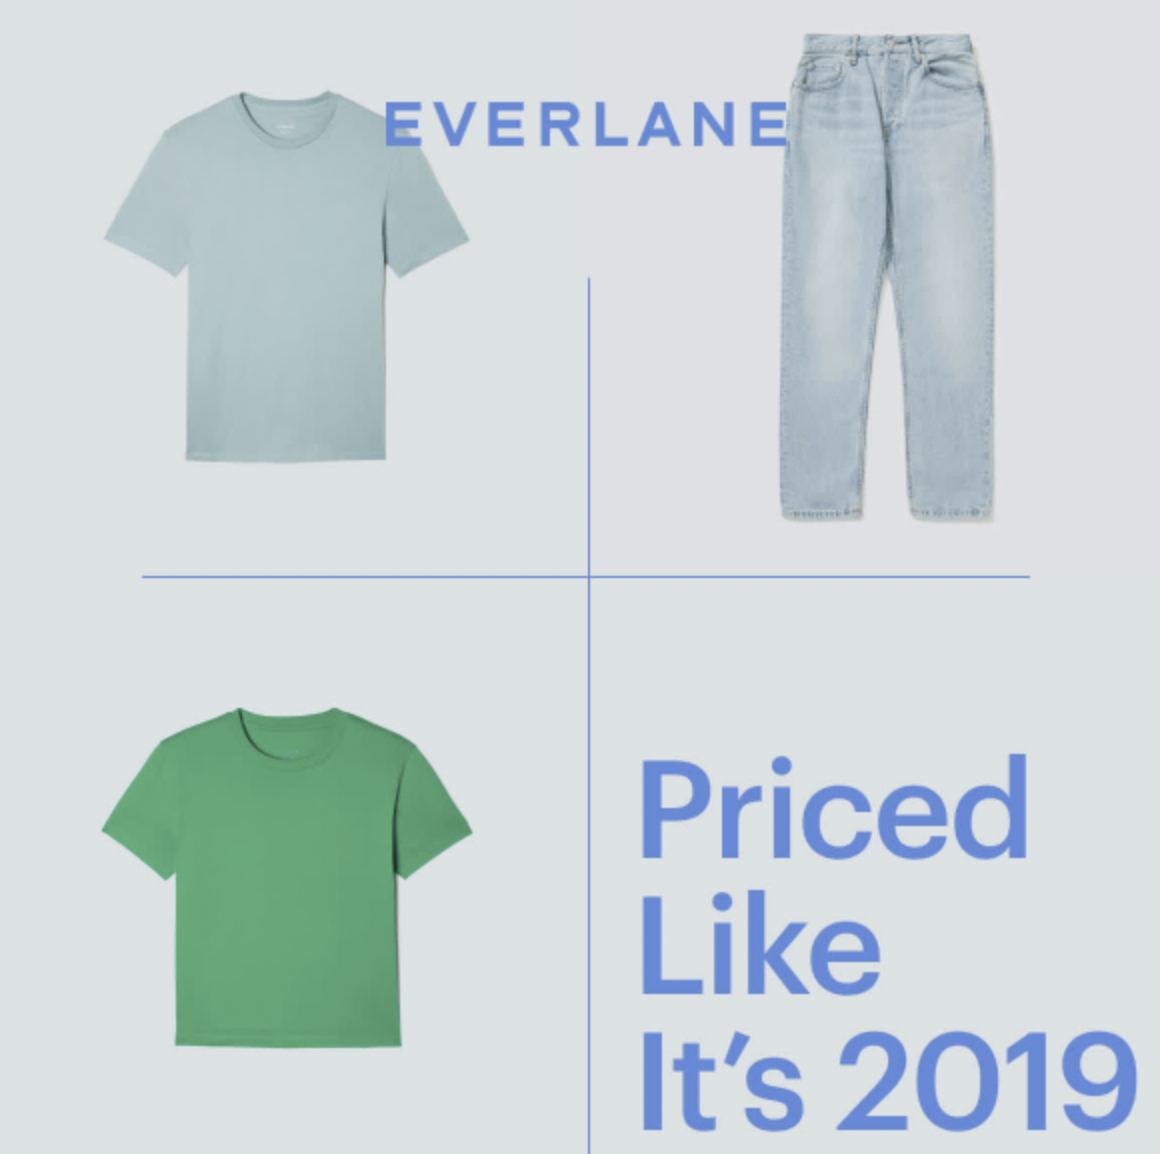 Graphic showing two shirts and a pair of jeans with text "everlane" and "priced 